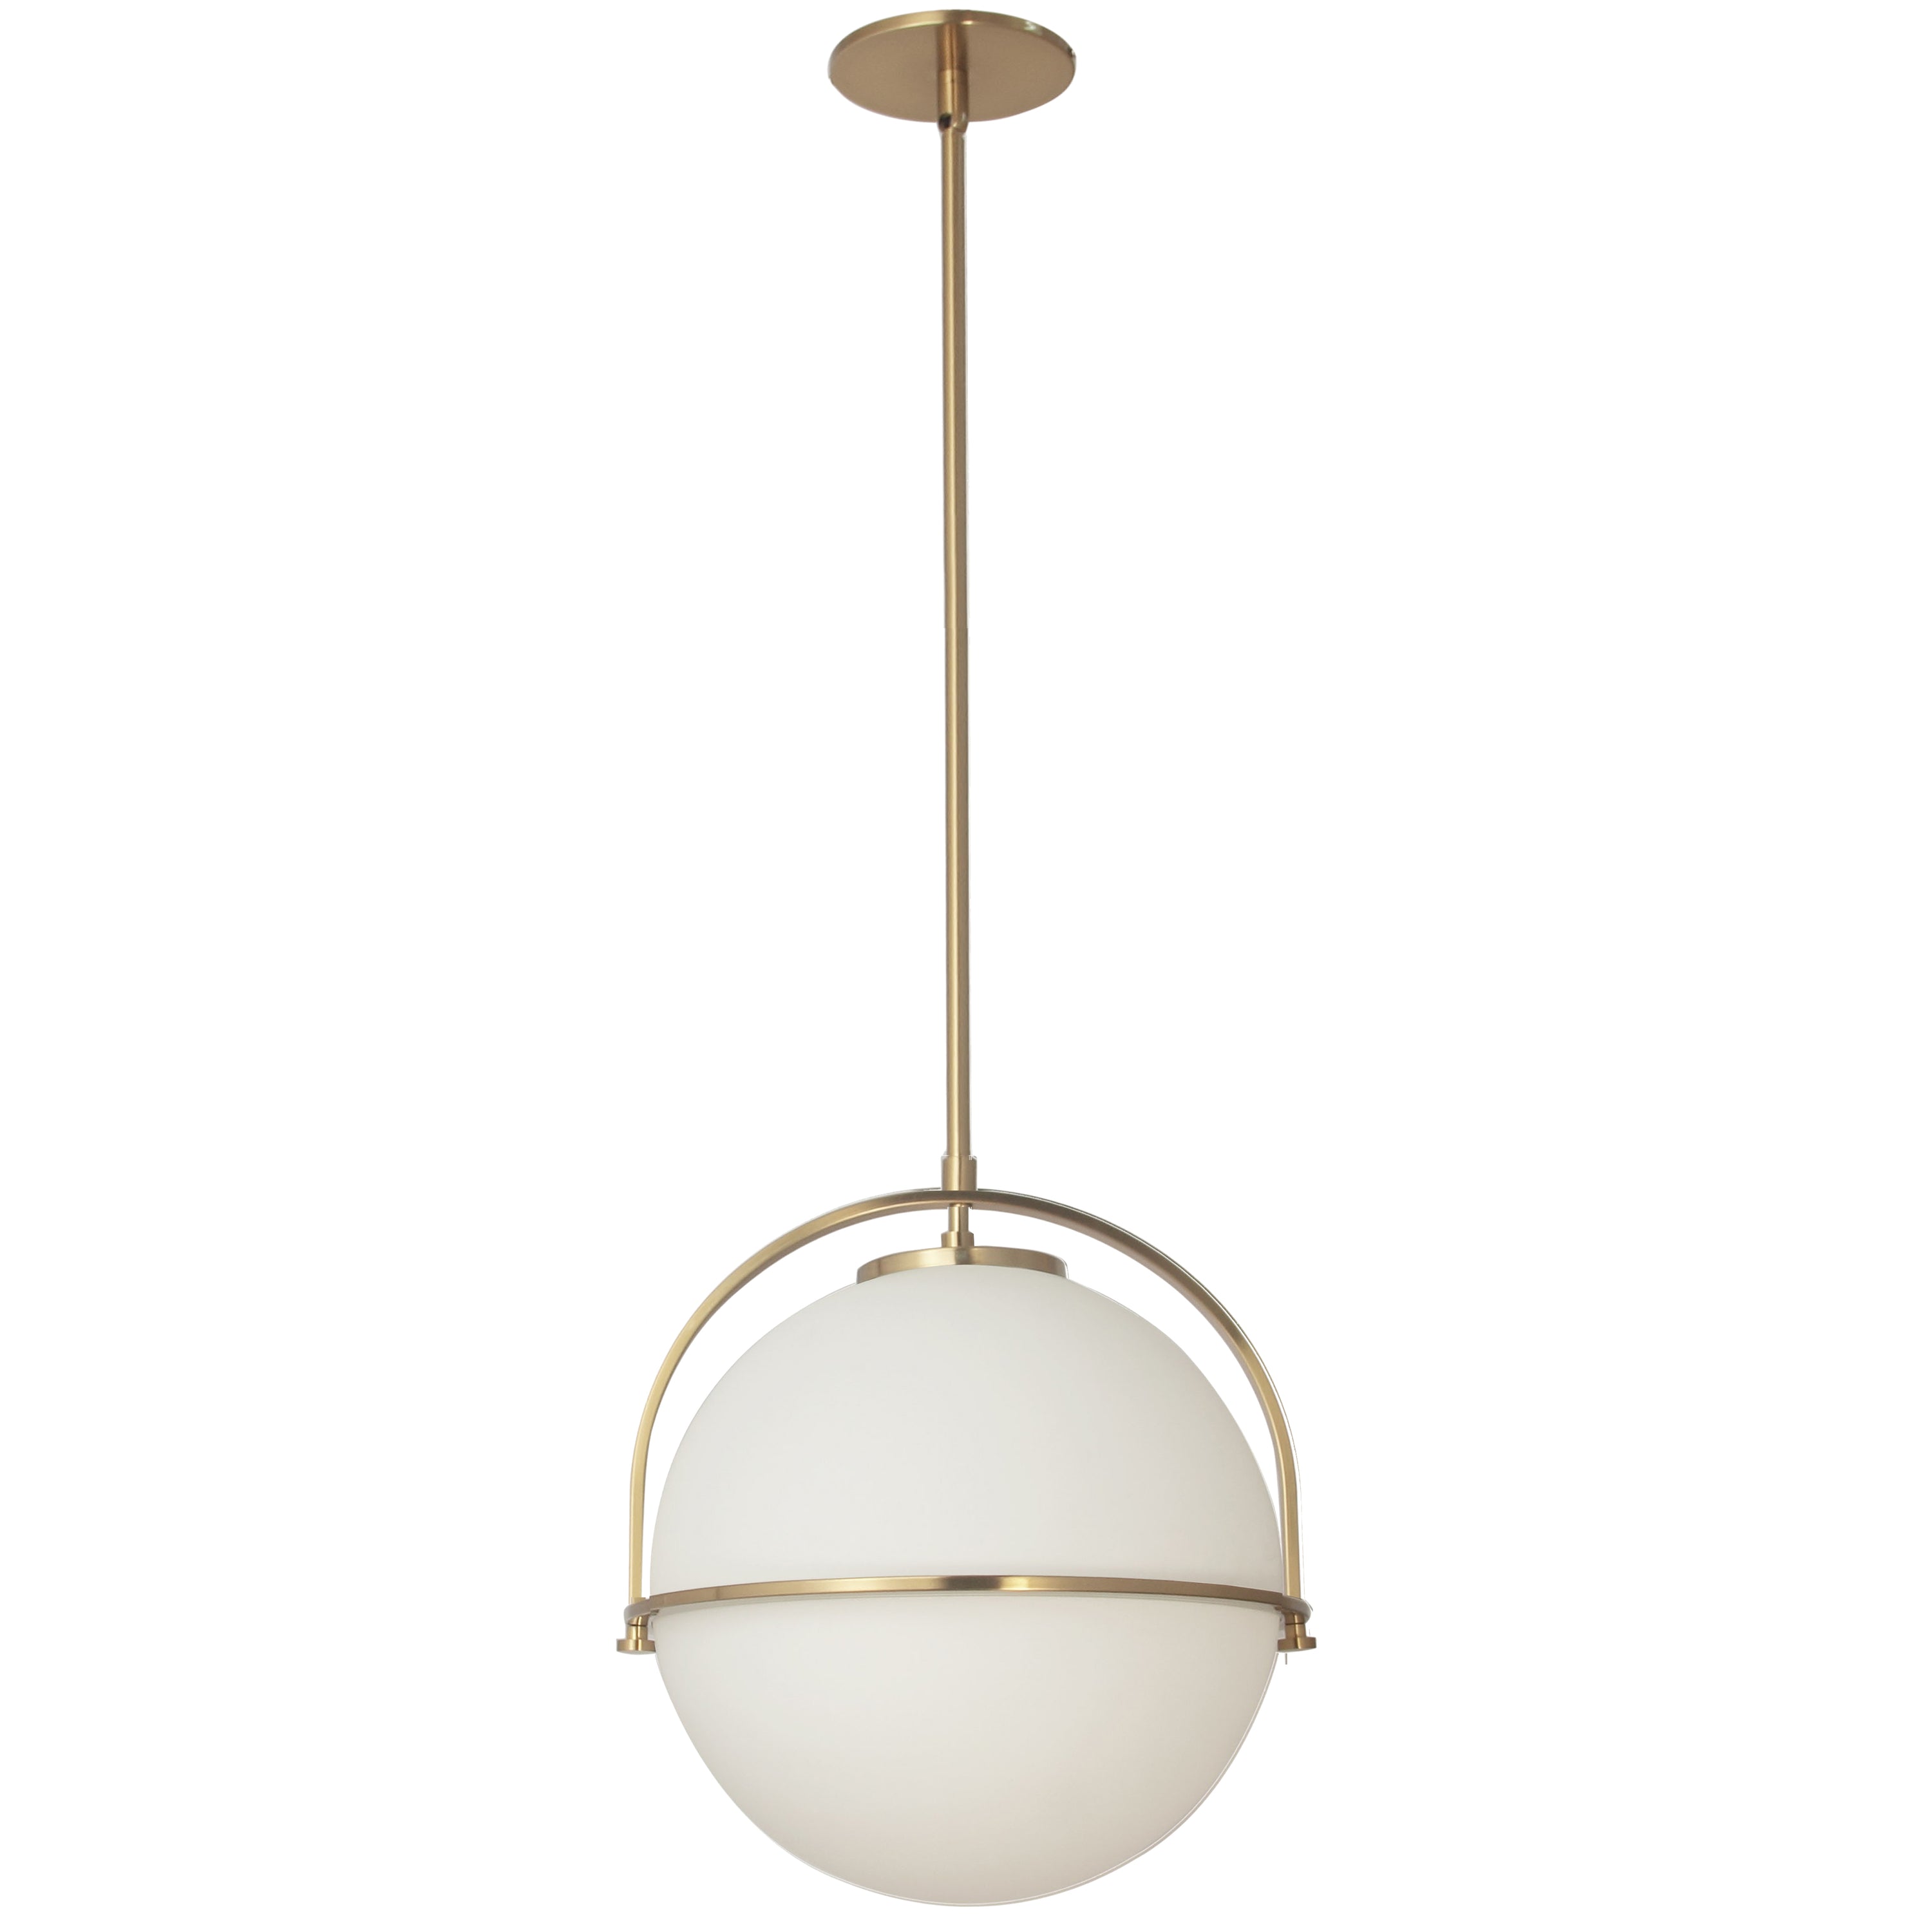 Dainolite PAO-131P-AGB 1 Light Incandescent Pendant Aged Brass with White Opal Glass